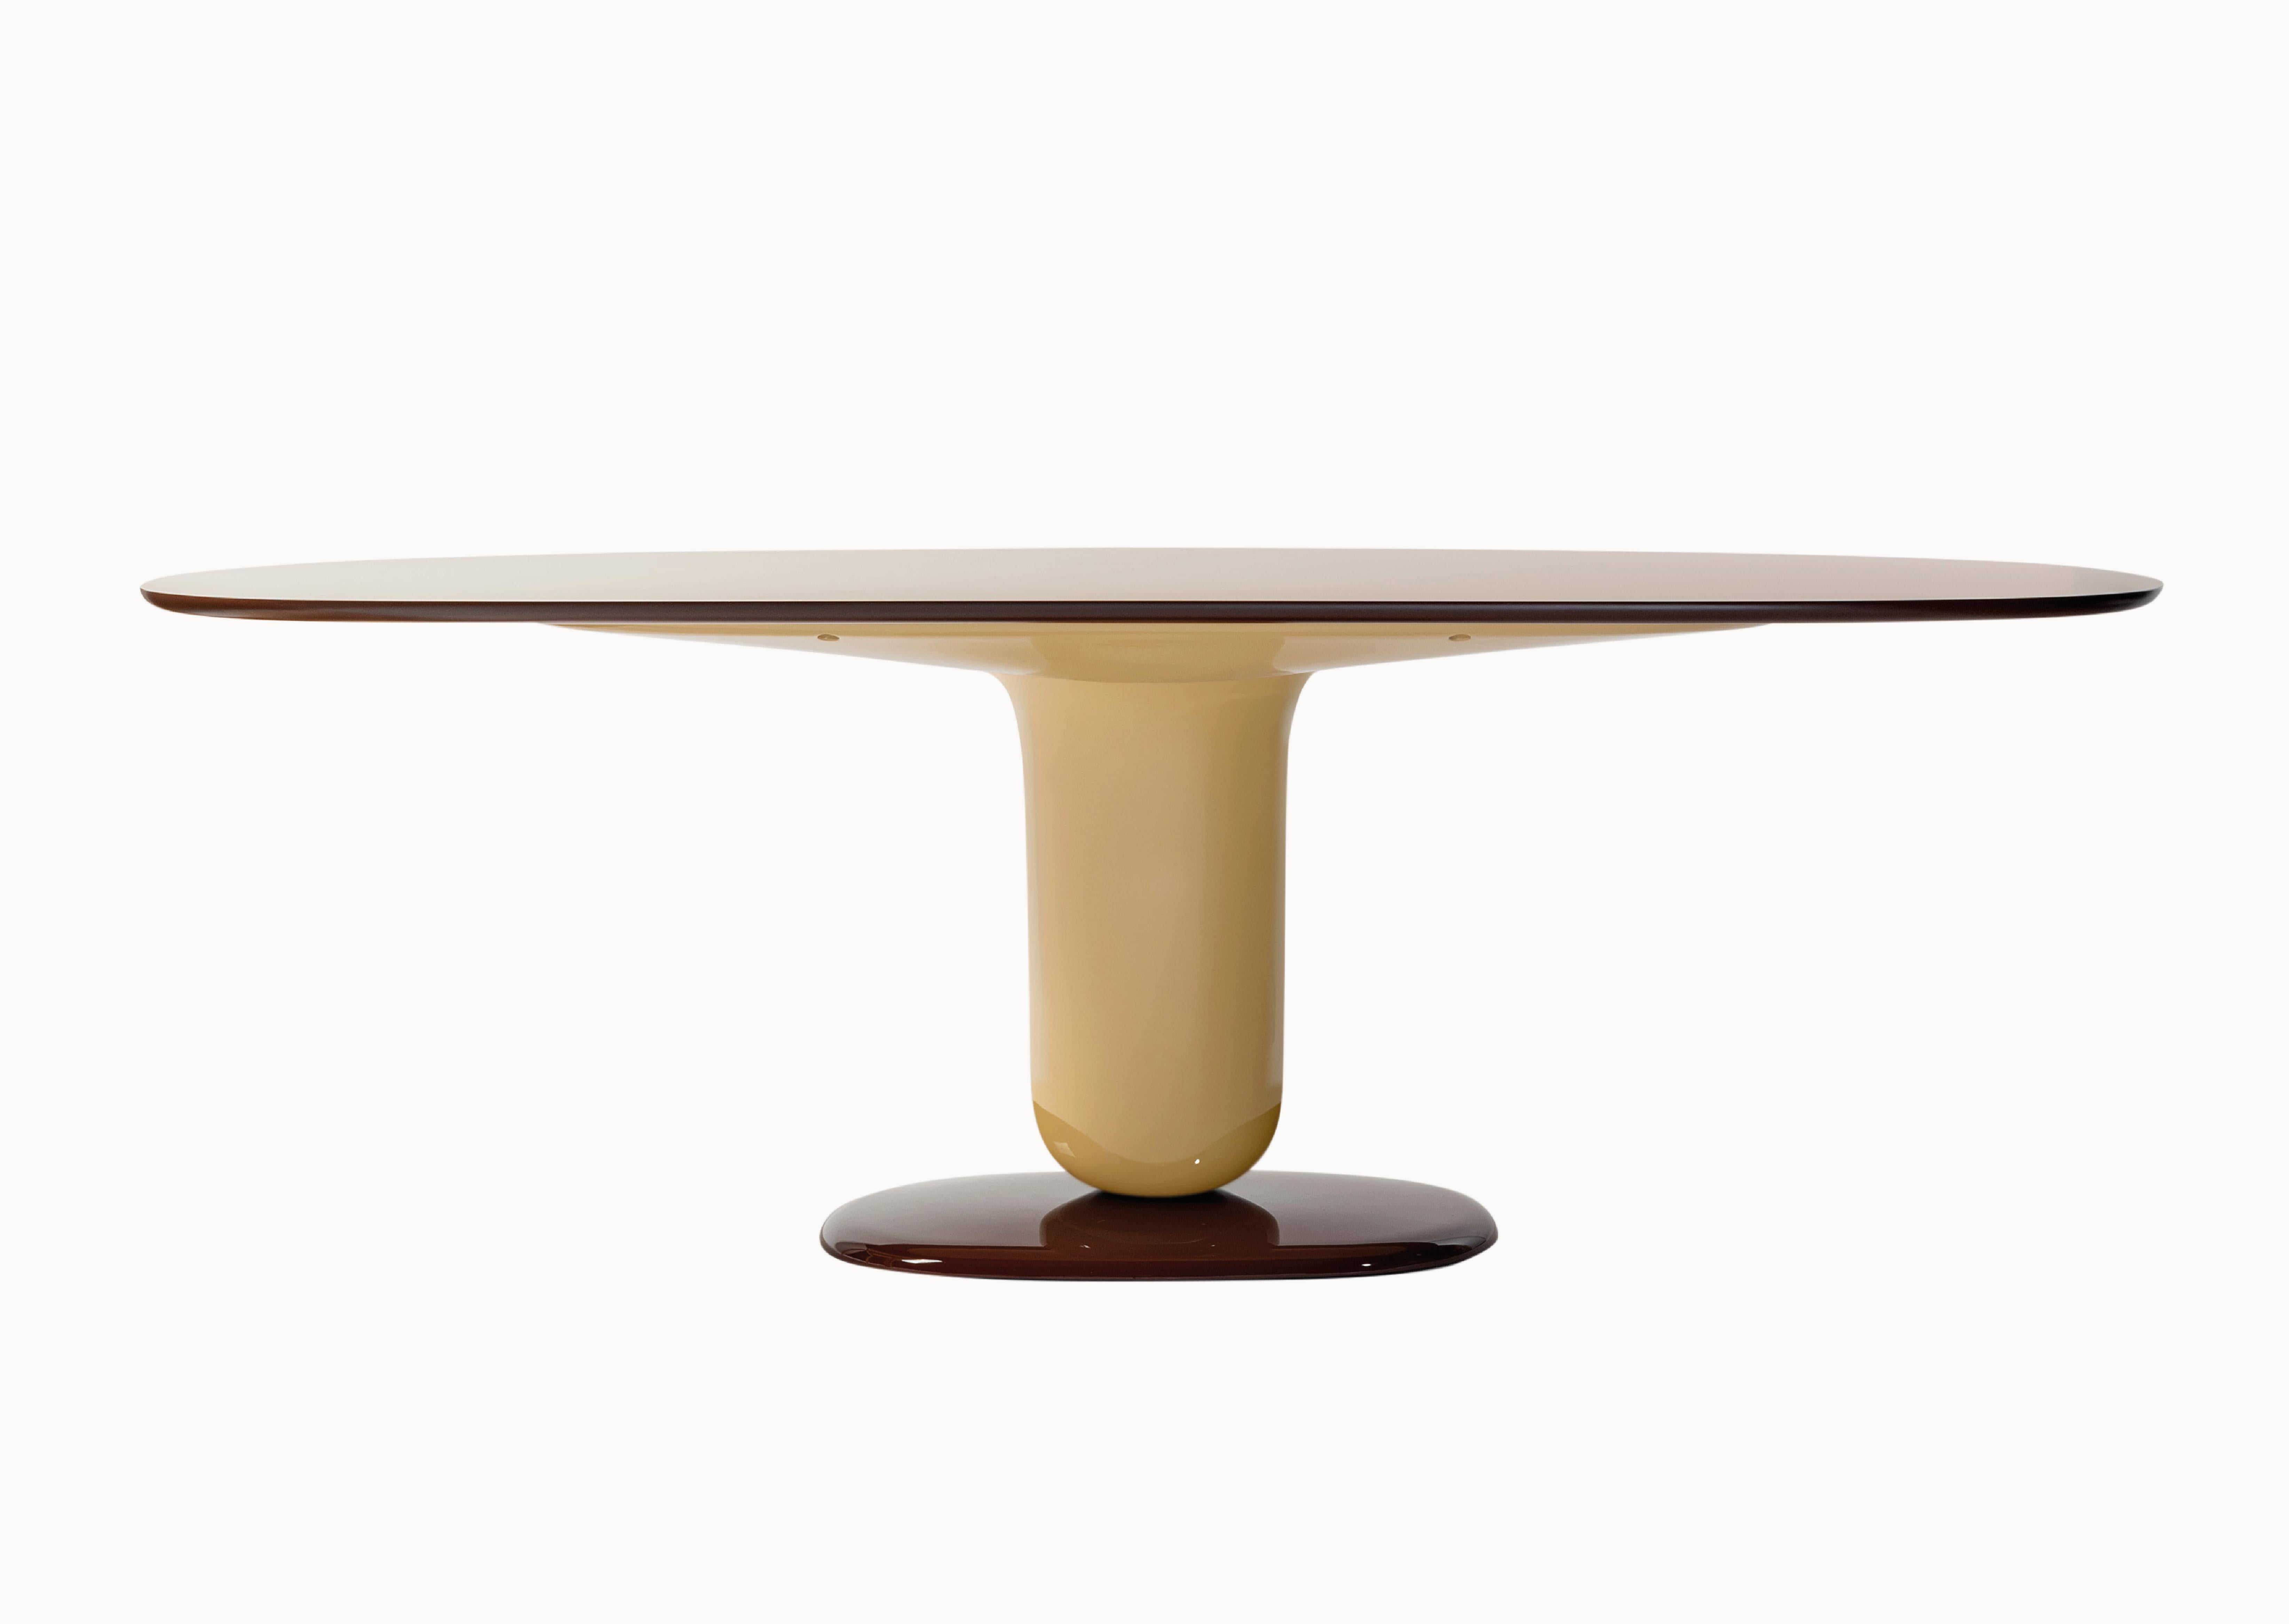 Organic Modern Contemporary Dining Table 'Explorer' by Jaime Hayon, 300 cm, Beige  For Sale